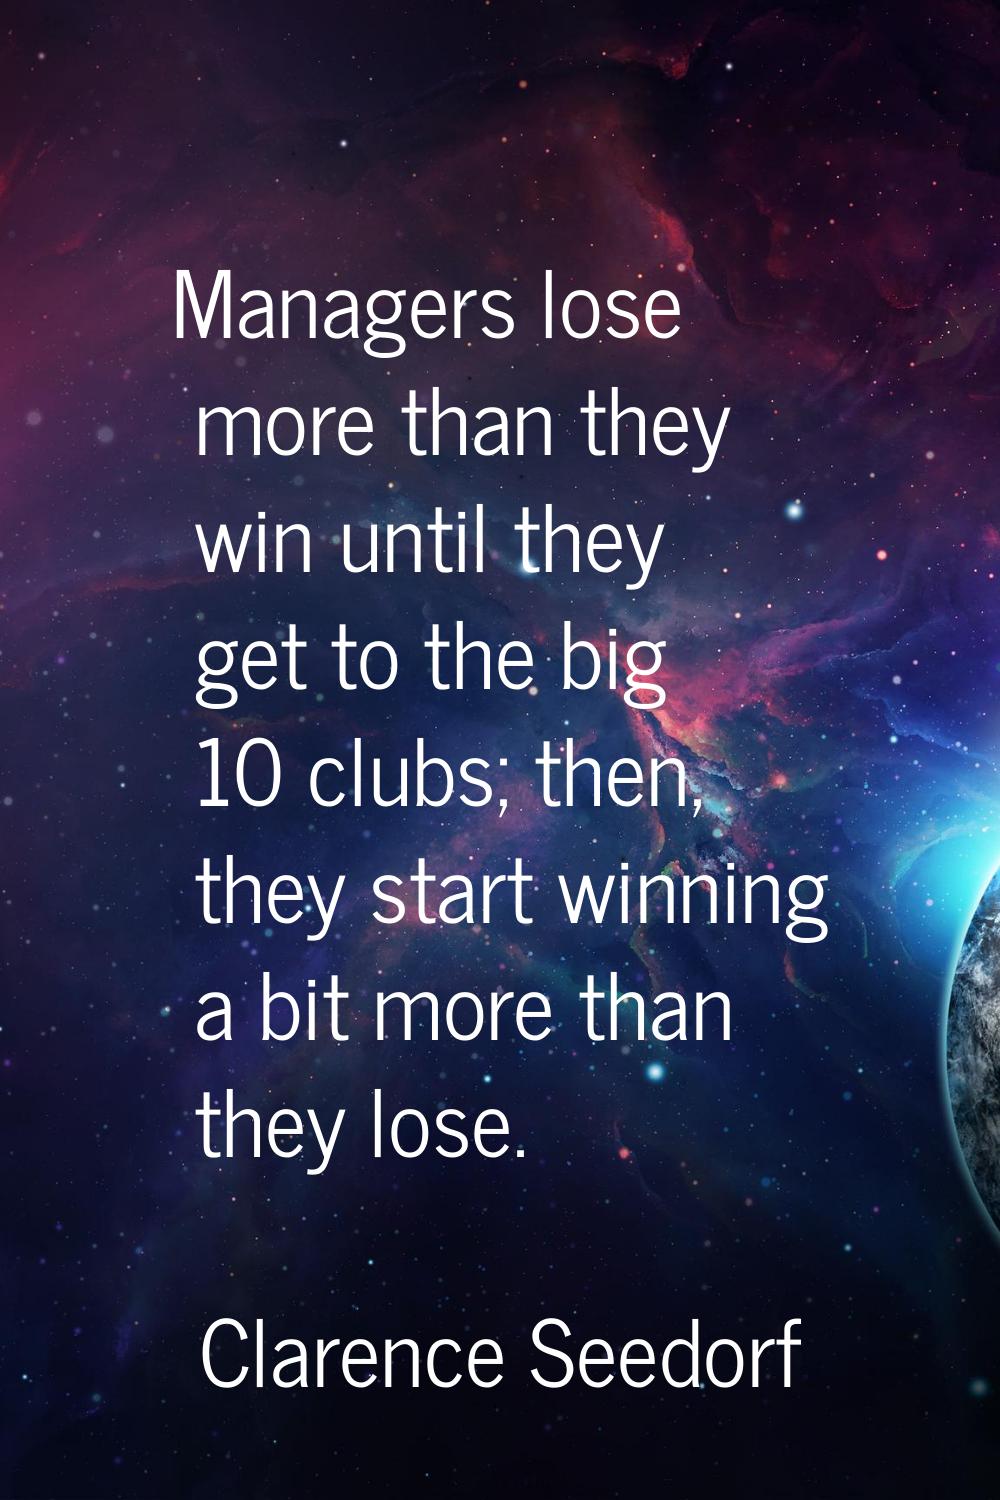 Managers lose more than they win until they get to the big 10 clubs; then, they start winning a bit